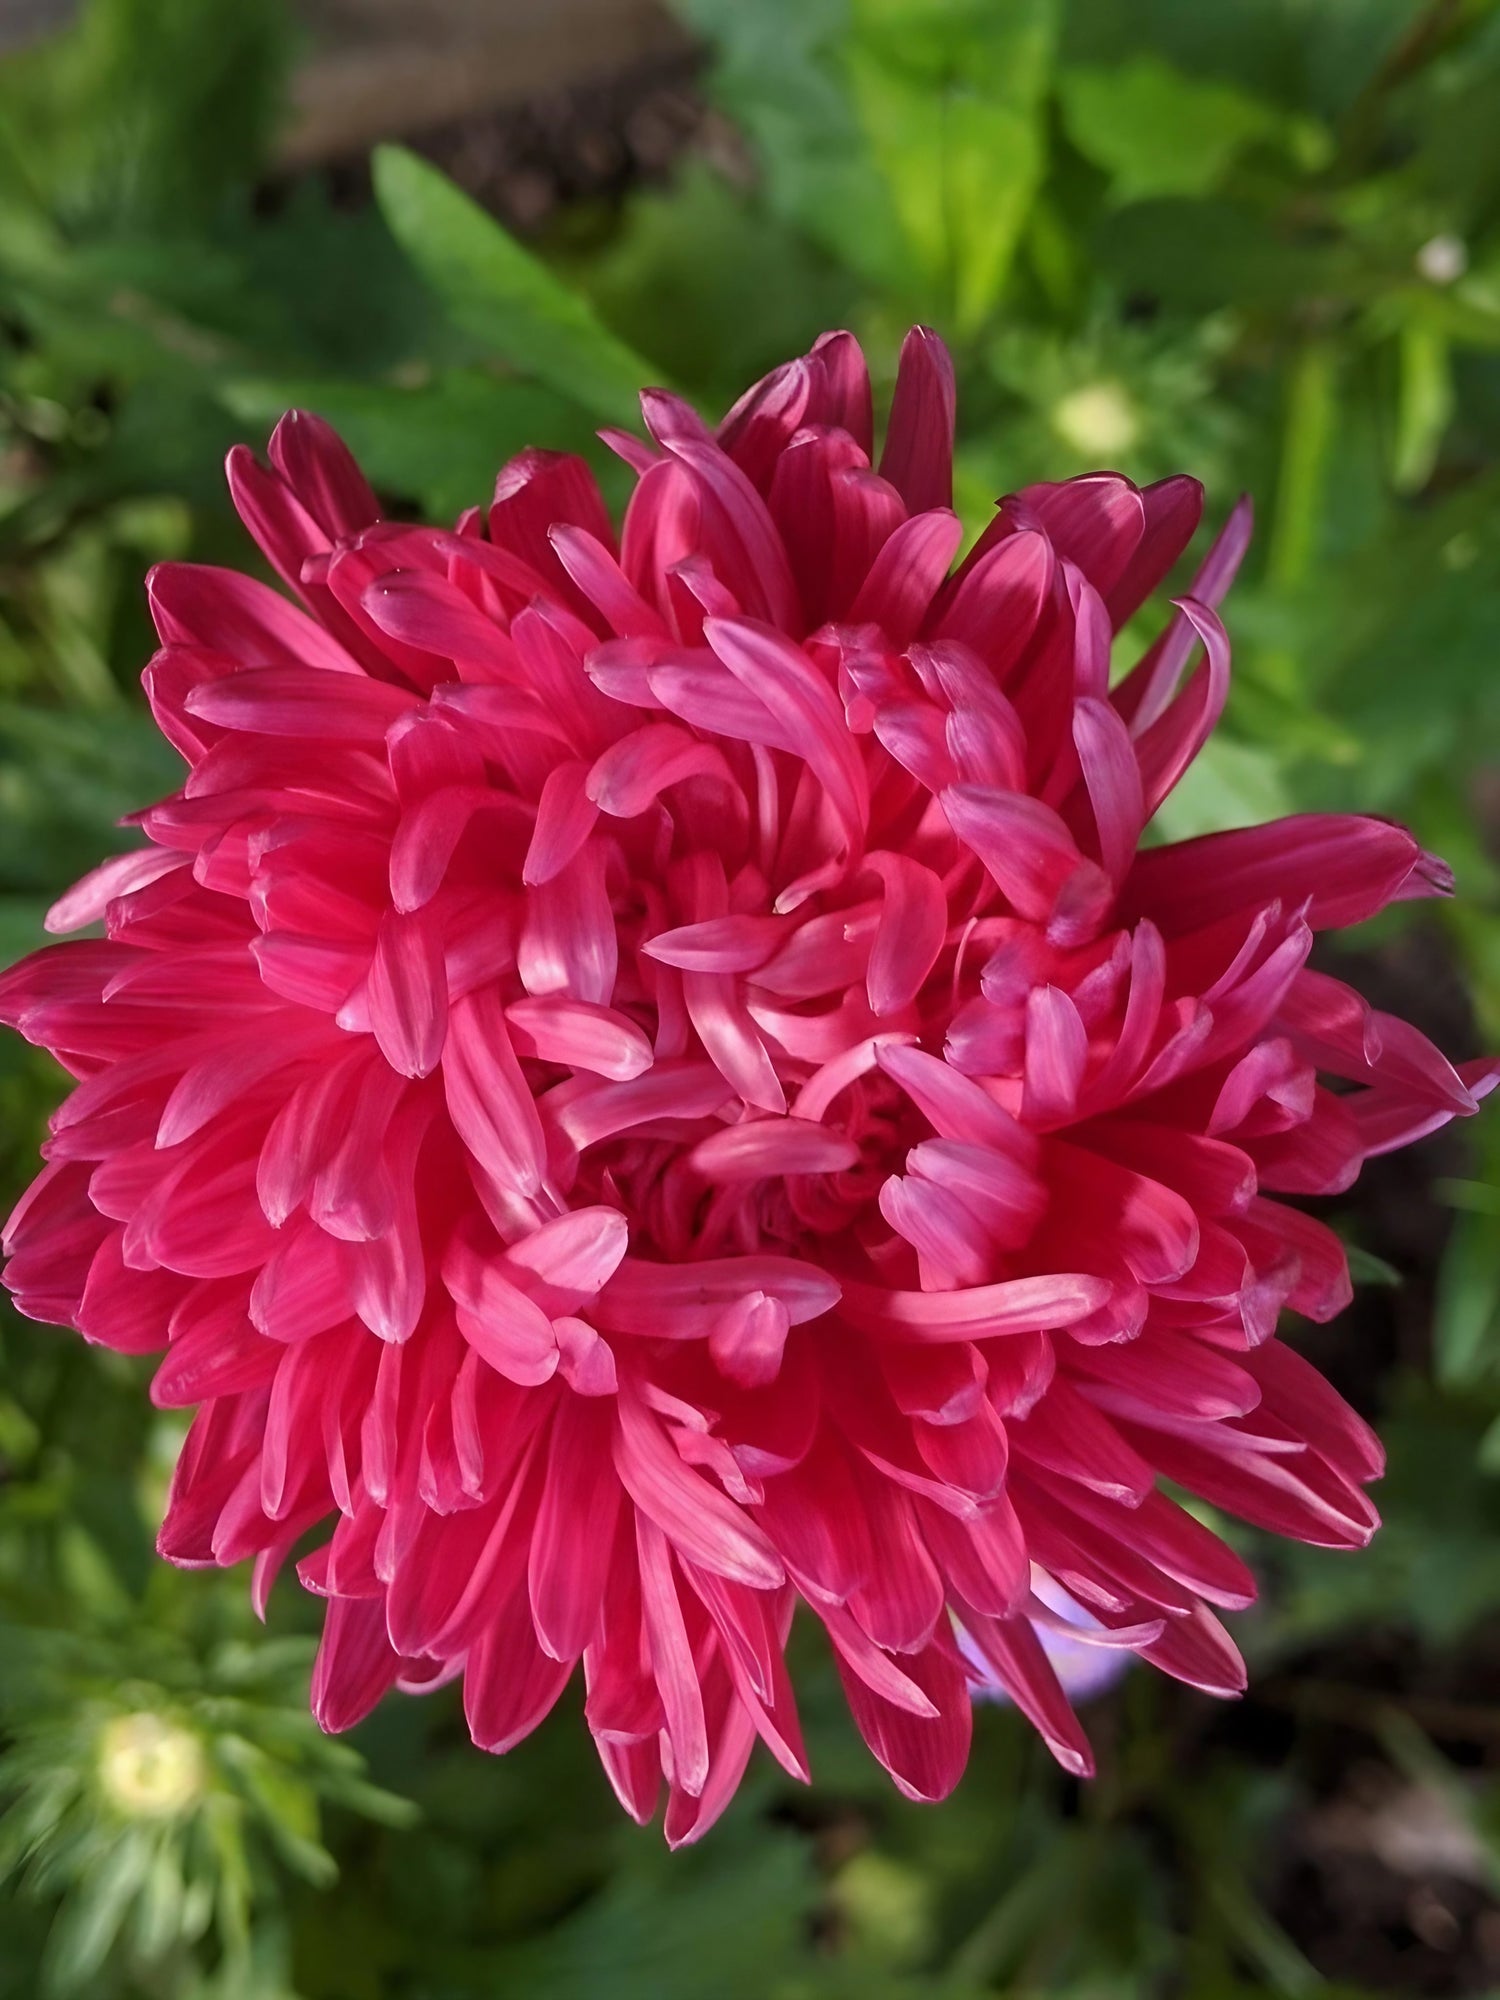 Close-up view of a pink Aster Duchess flower with its green foliage